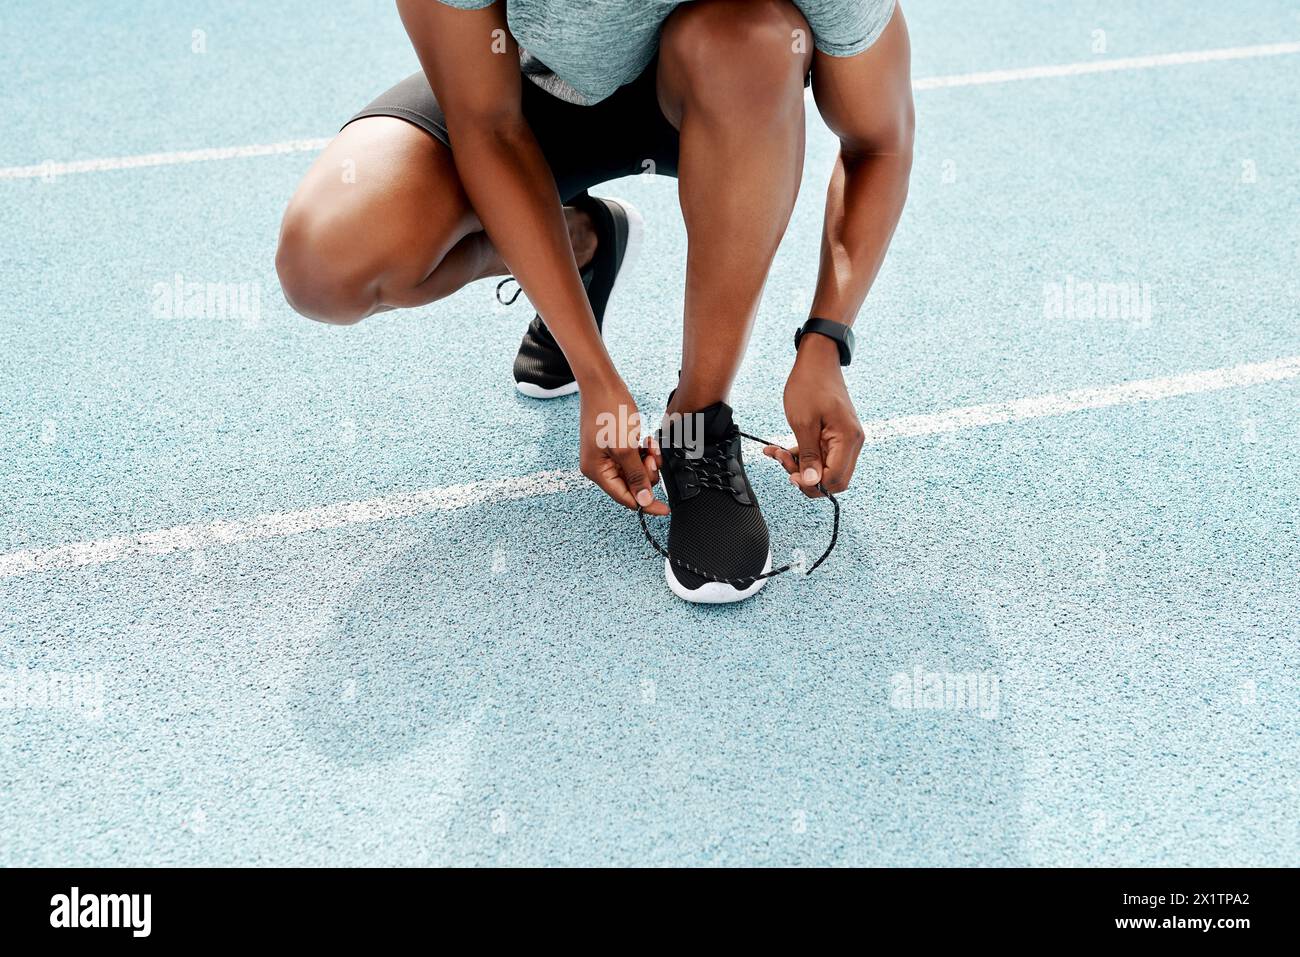 Running, shoes and hands of fitness man at stadium for training, workout or morning cardio. Shoelace, legs and runner at arena for race track exercise Stock Photo